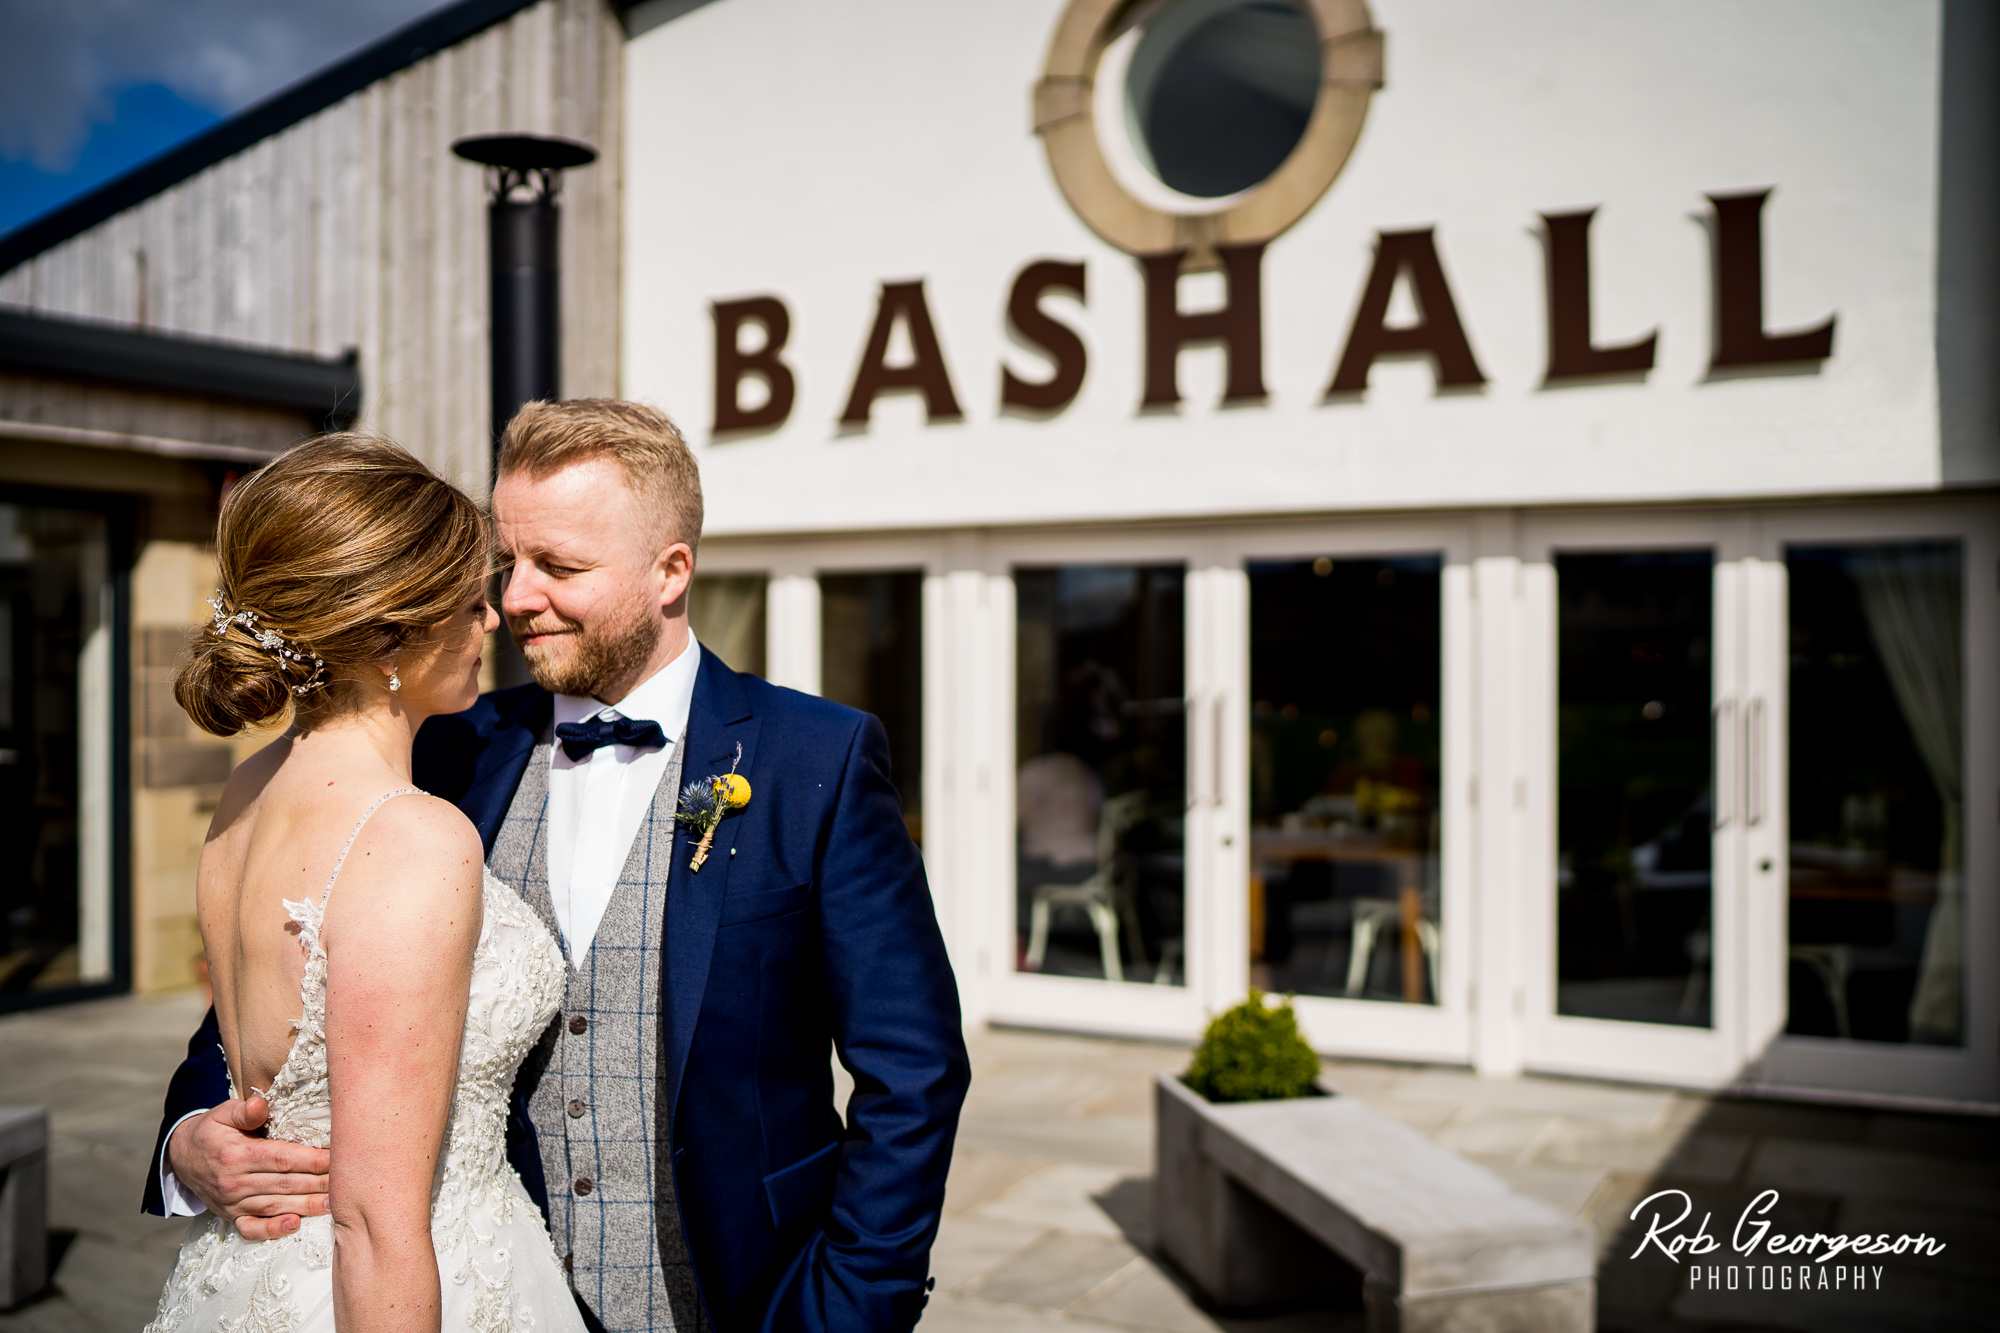 Bride and Groom married at Bashall Barn Wedding Venue